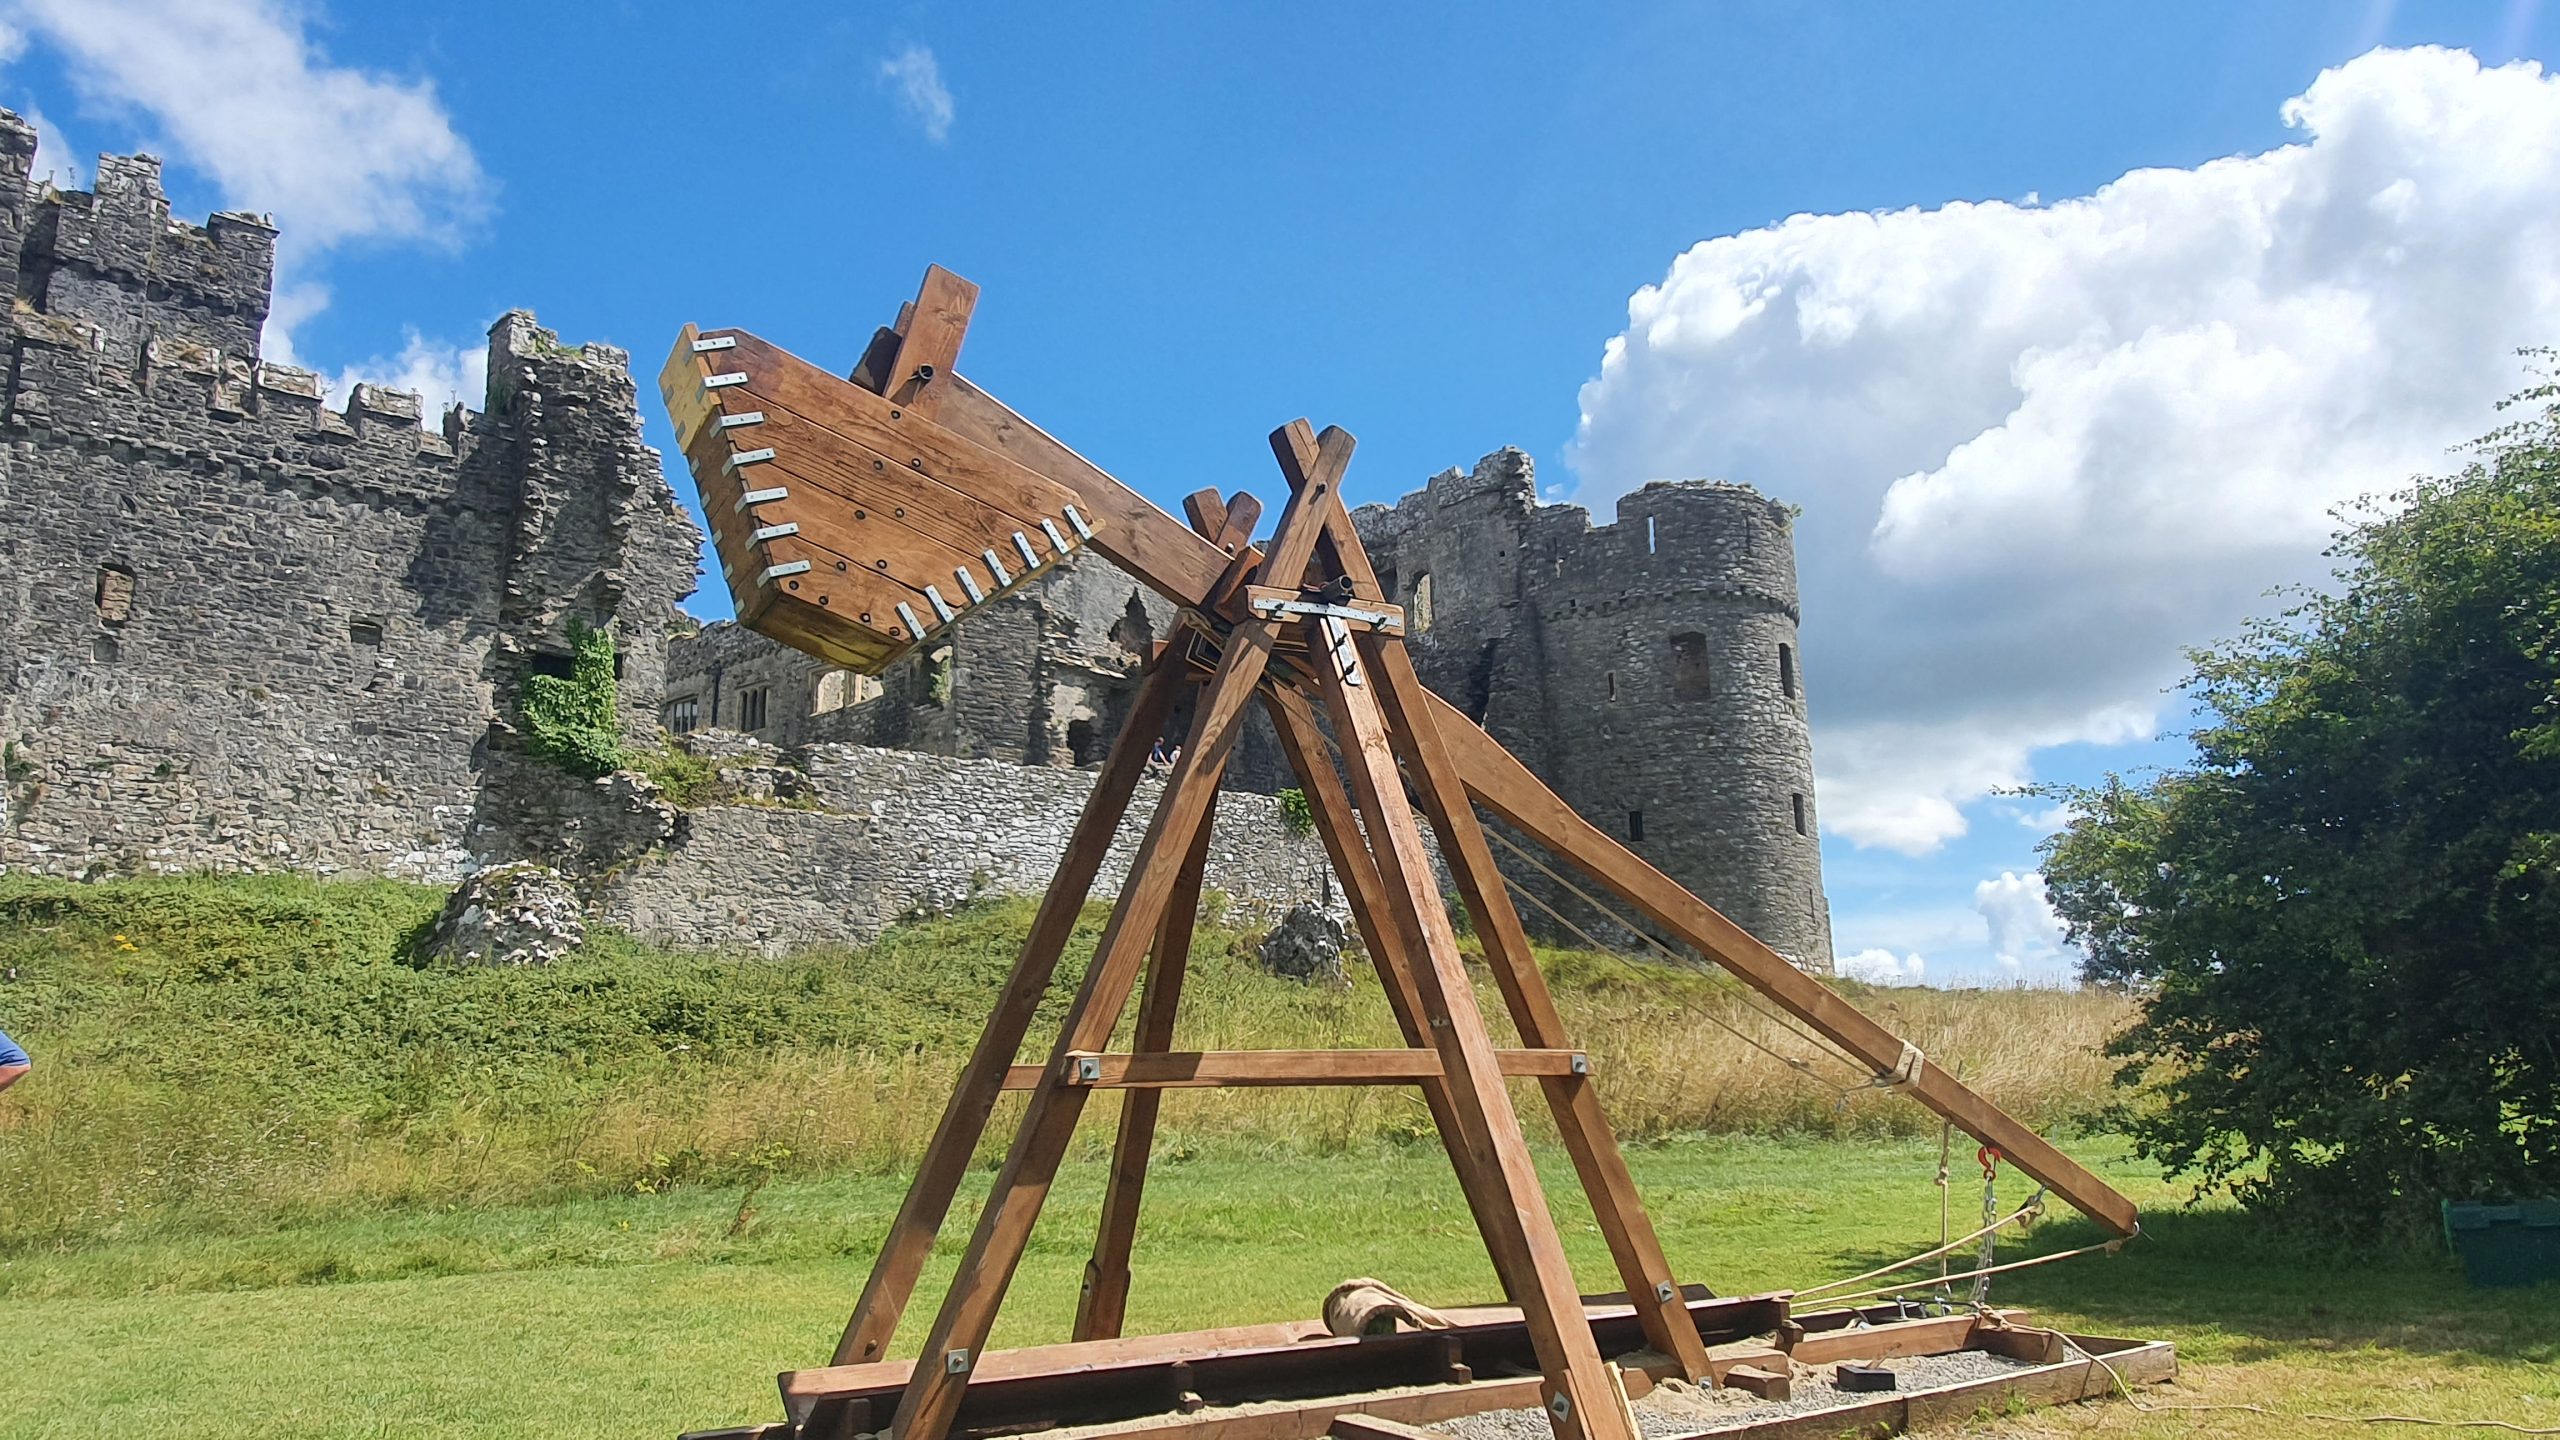 A giant trebuchet with Carew Castle in the background.